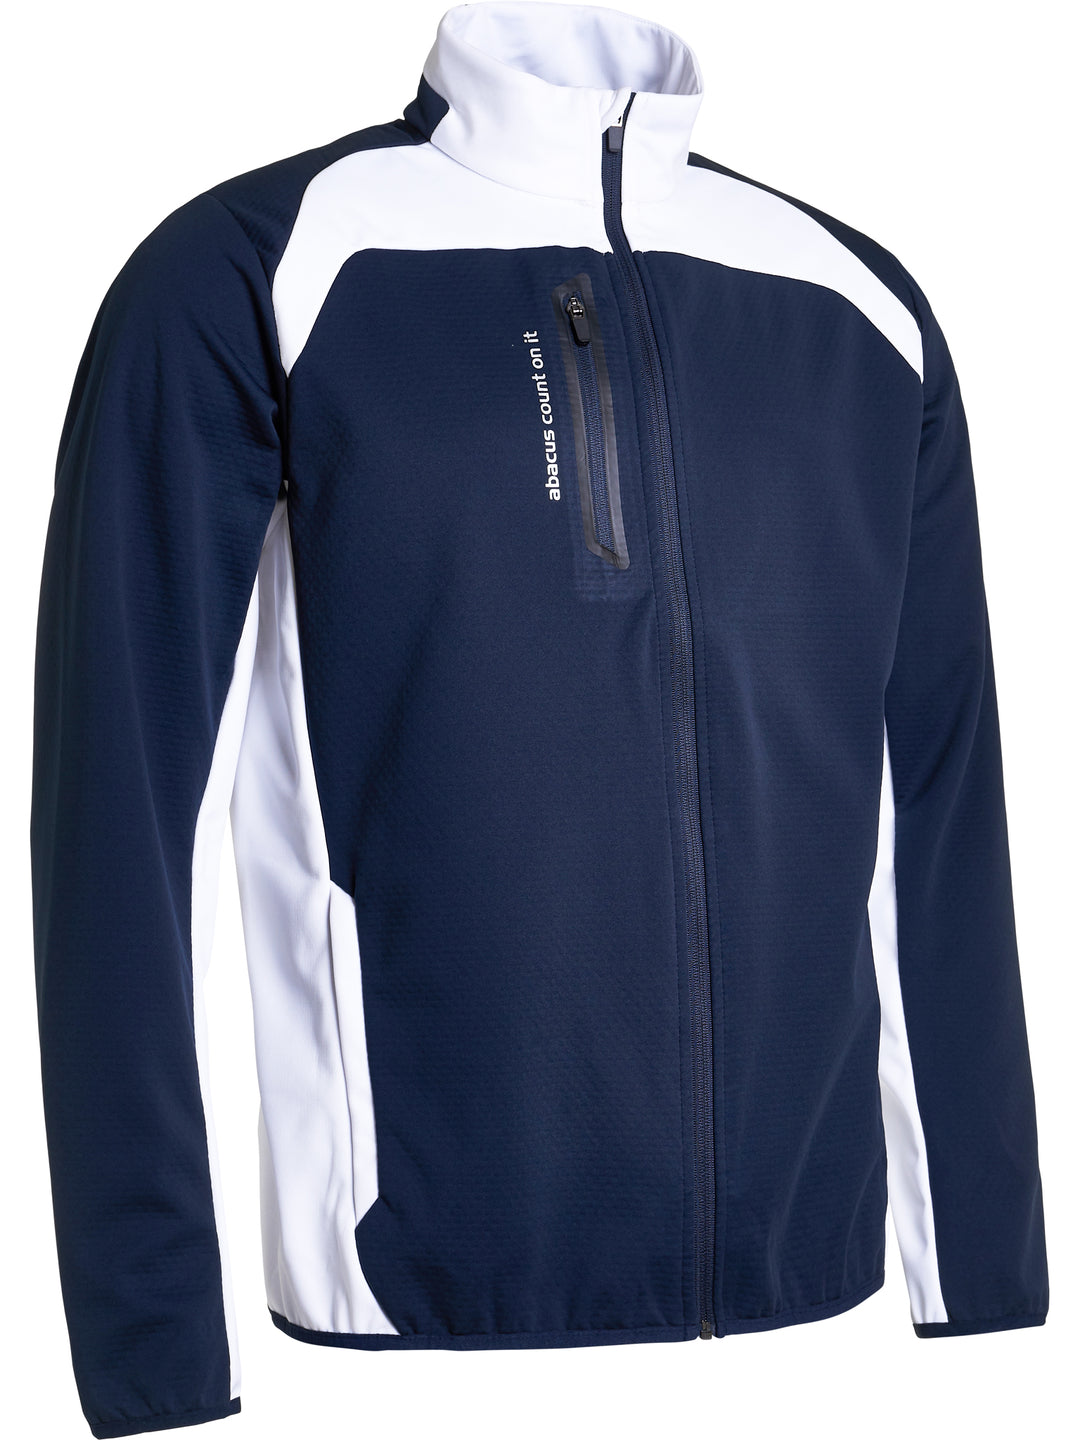 Abacus Sports Wear: Men’s High-Performance Softshell Jacket – Arden